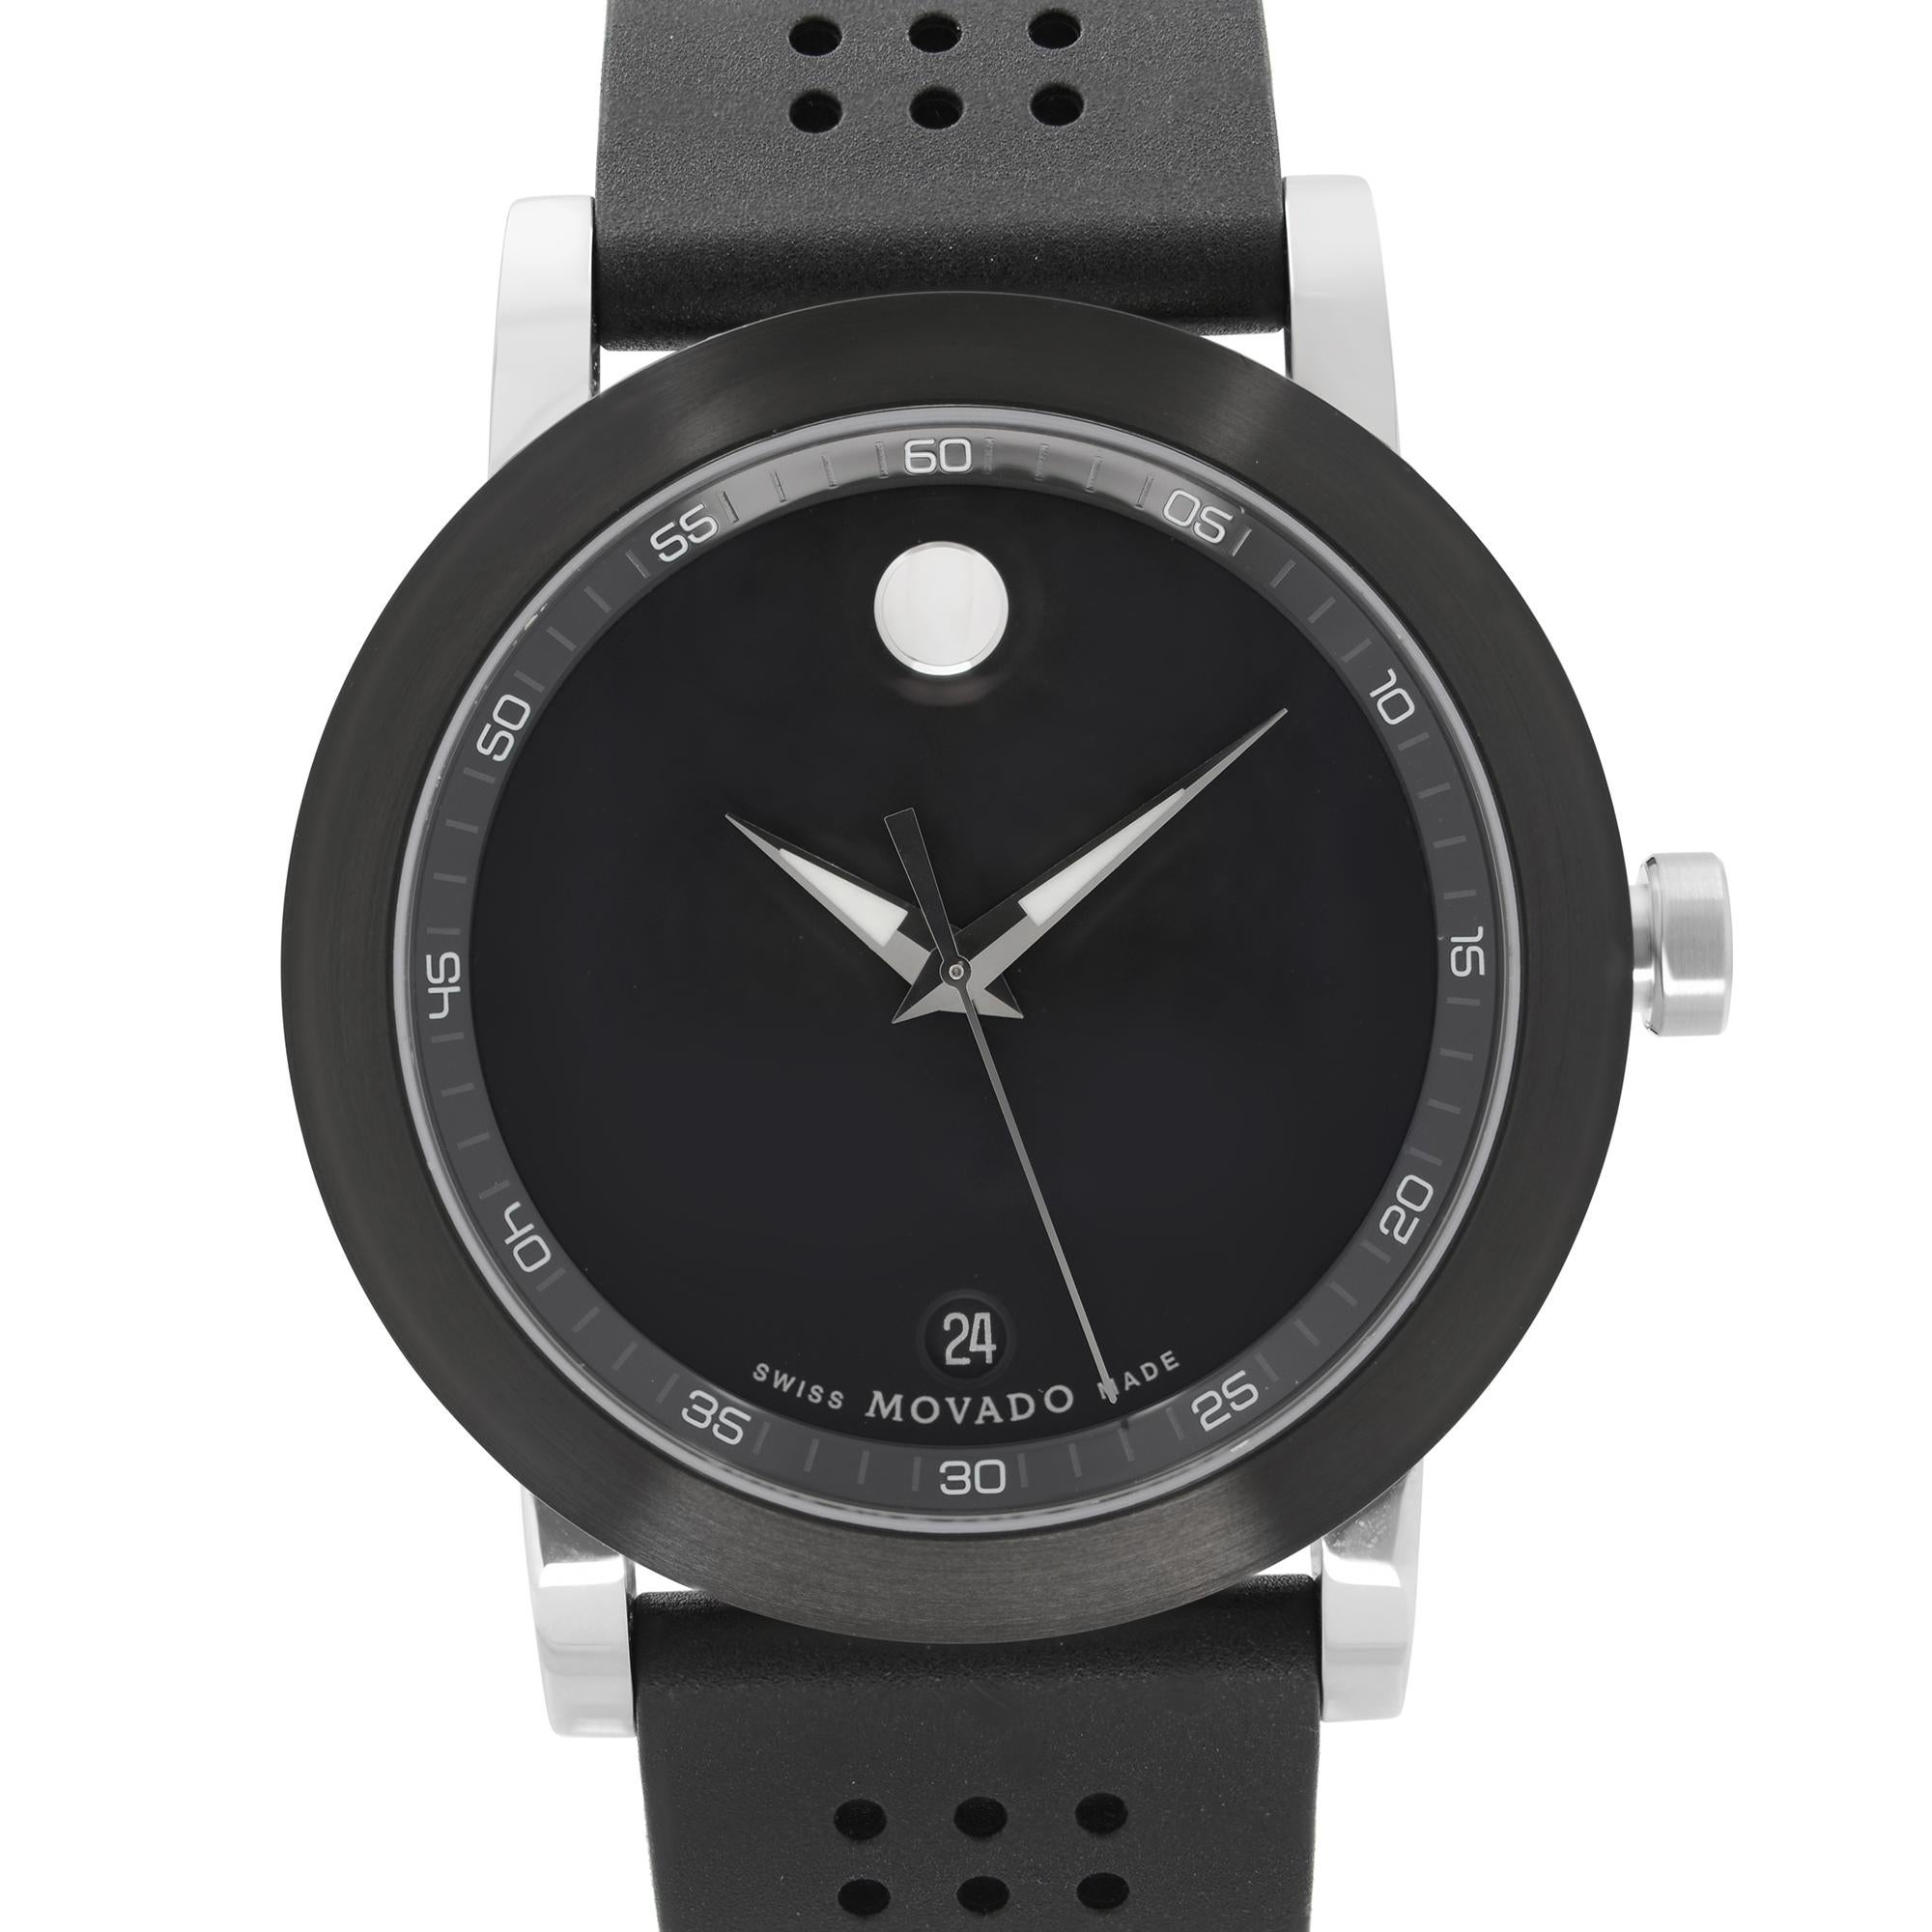 Store Display Model Movado Museum Sport Steel Rubber Strap Black Dial Quartz Men's Watch 0606507. Original Box and Papers are Included. Covered by 1-year Chronostore Warranty.
Details:
MSRP 795
Brand Movado
Department Men
Model Number